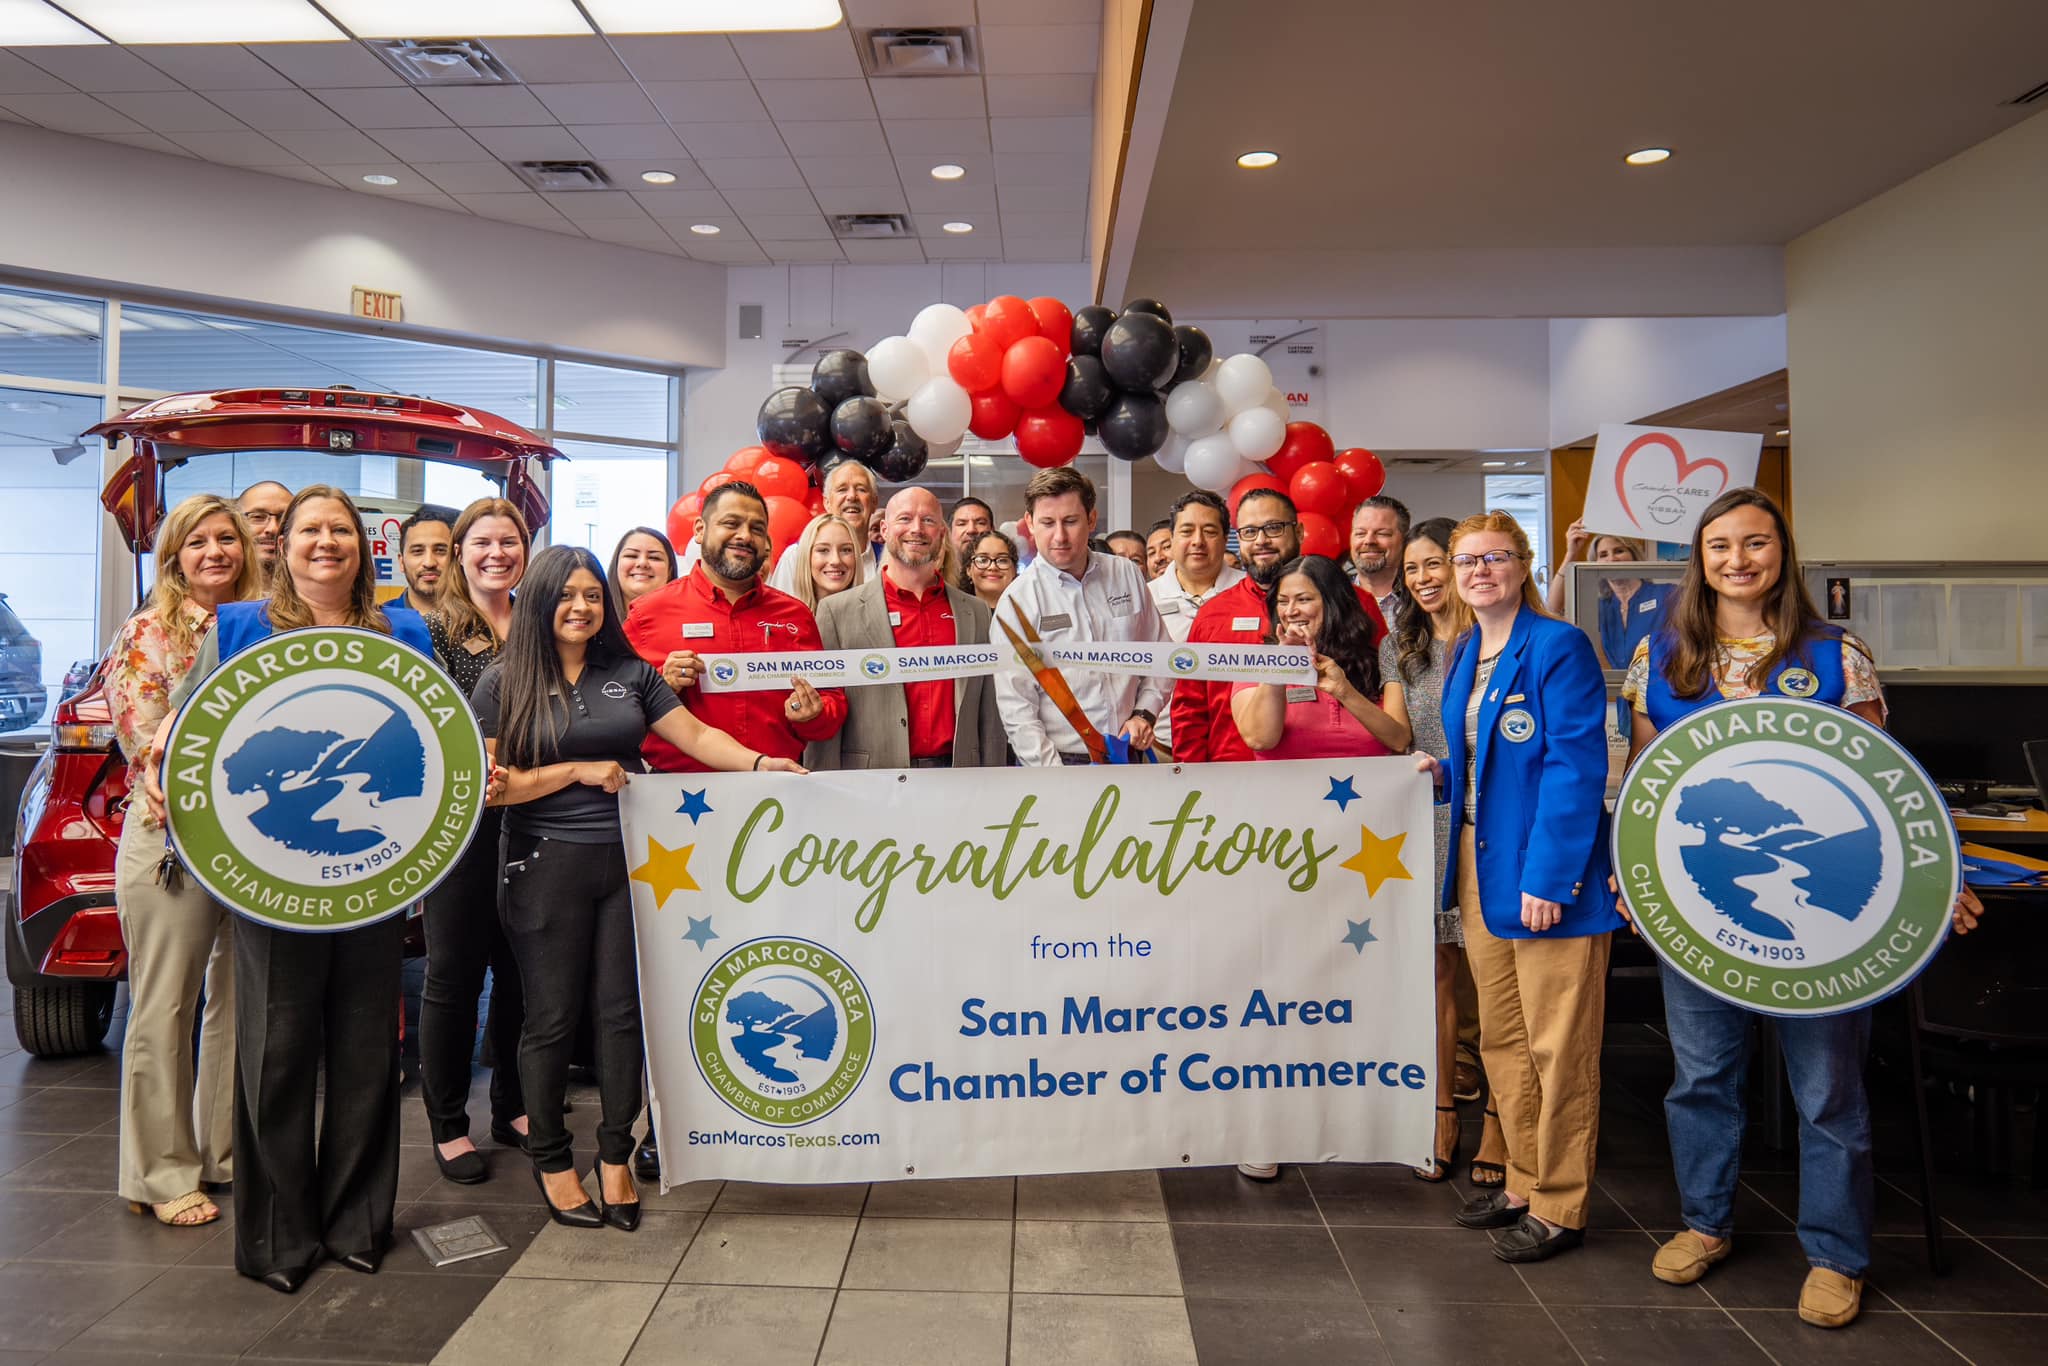 May be an image of 8 people, jeep and text that says 'छा SANMANCOS SAN ANMMICIOS SAN MARCOS MARCOS AREA SAN CHAMBER OF EST#1903 N SAN MARCOS MARCOS SAN ΑΓΕ Congratulations MARCOS .% AT from the 三 San Marcos Area Chamber of Commerce ក្ចបម្ចនា SanMartosTexas.co com AMBER OF ESTA1903 COMMEKCK'